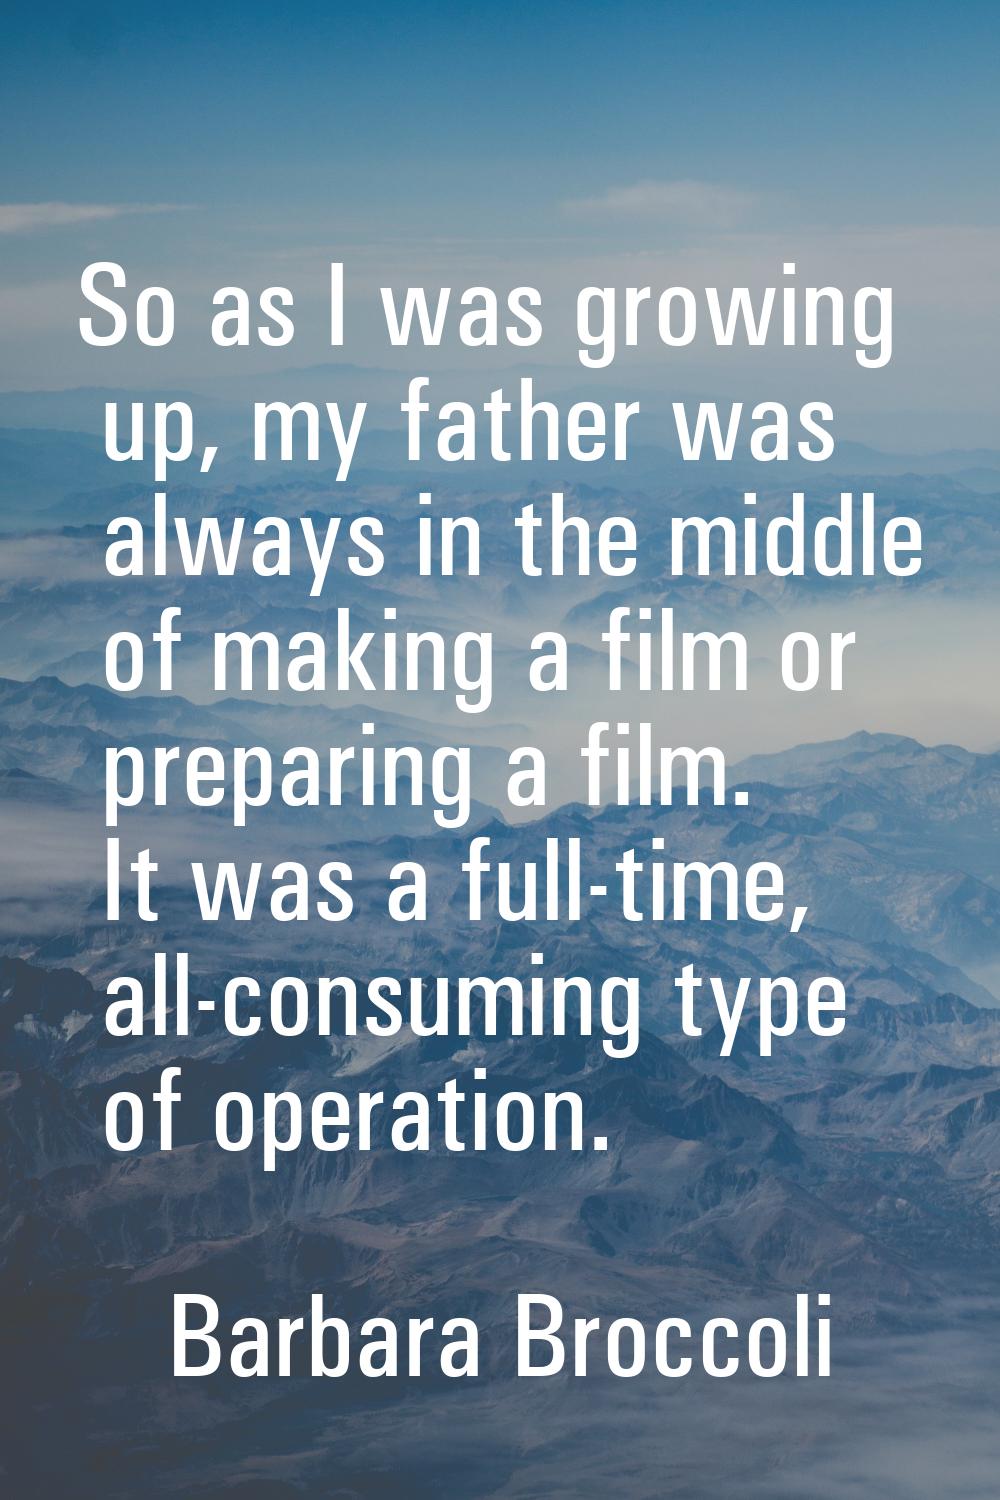 So as I was growing up, my father was always in the middle of making a film or preparing a film. It